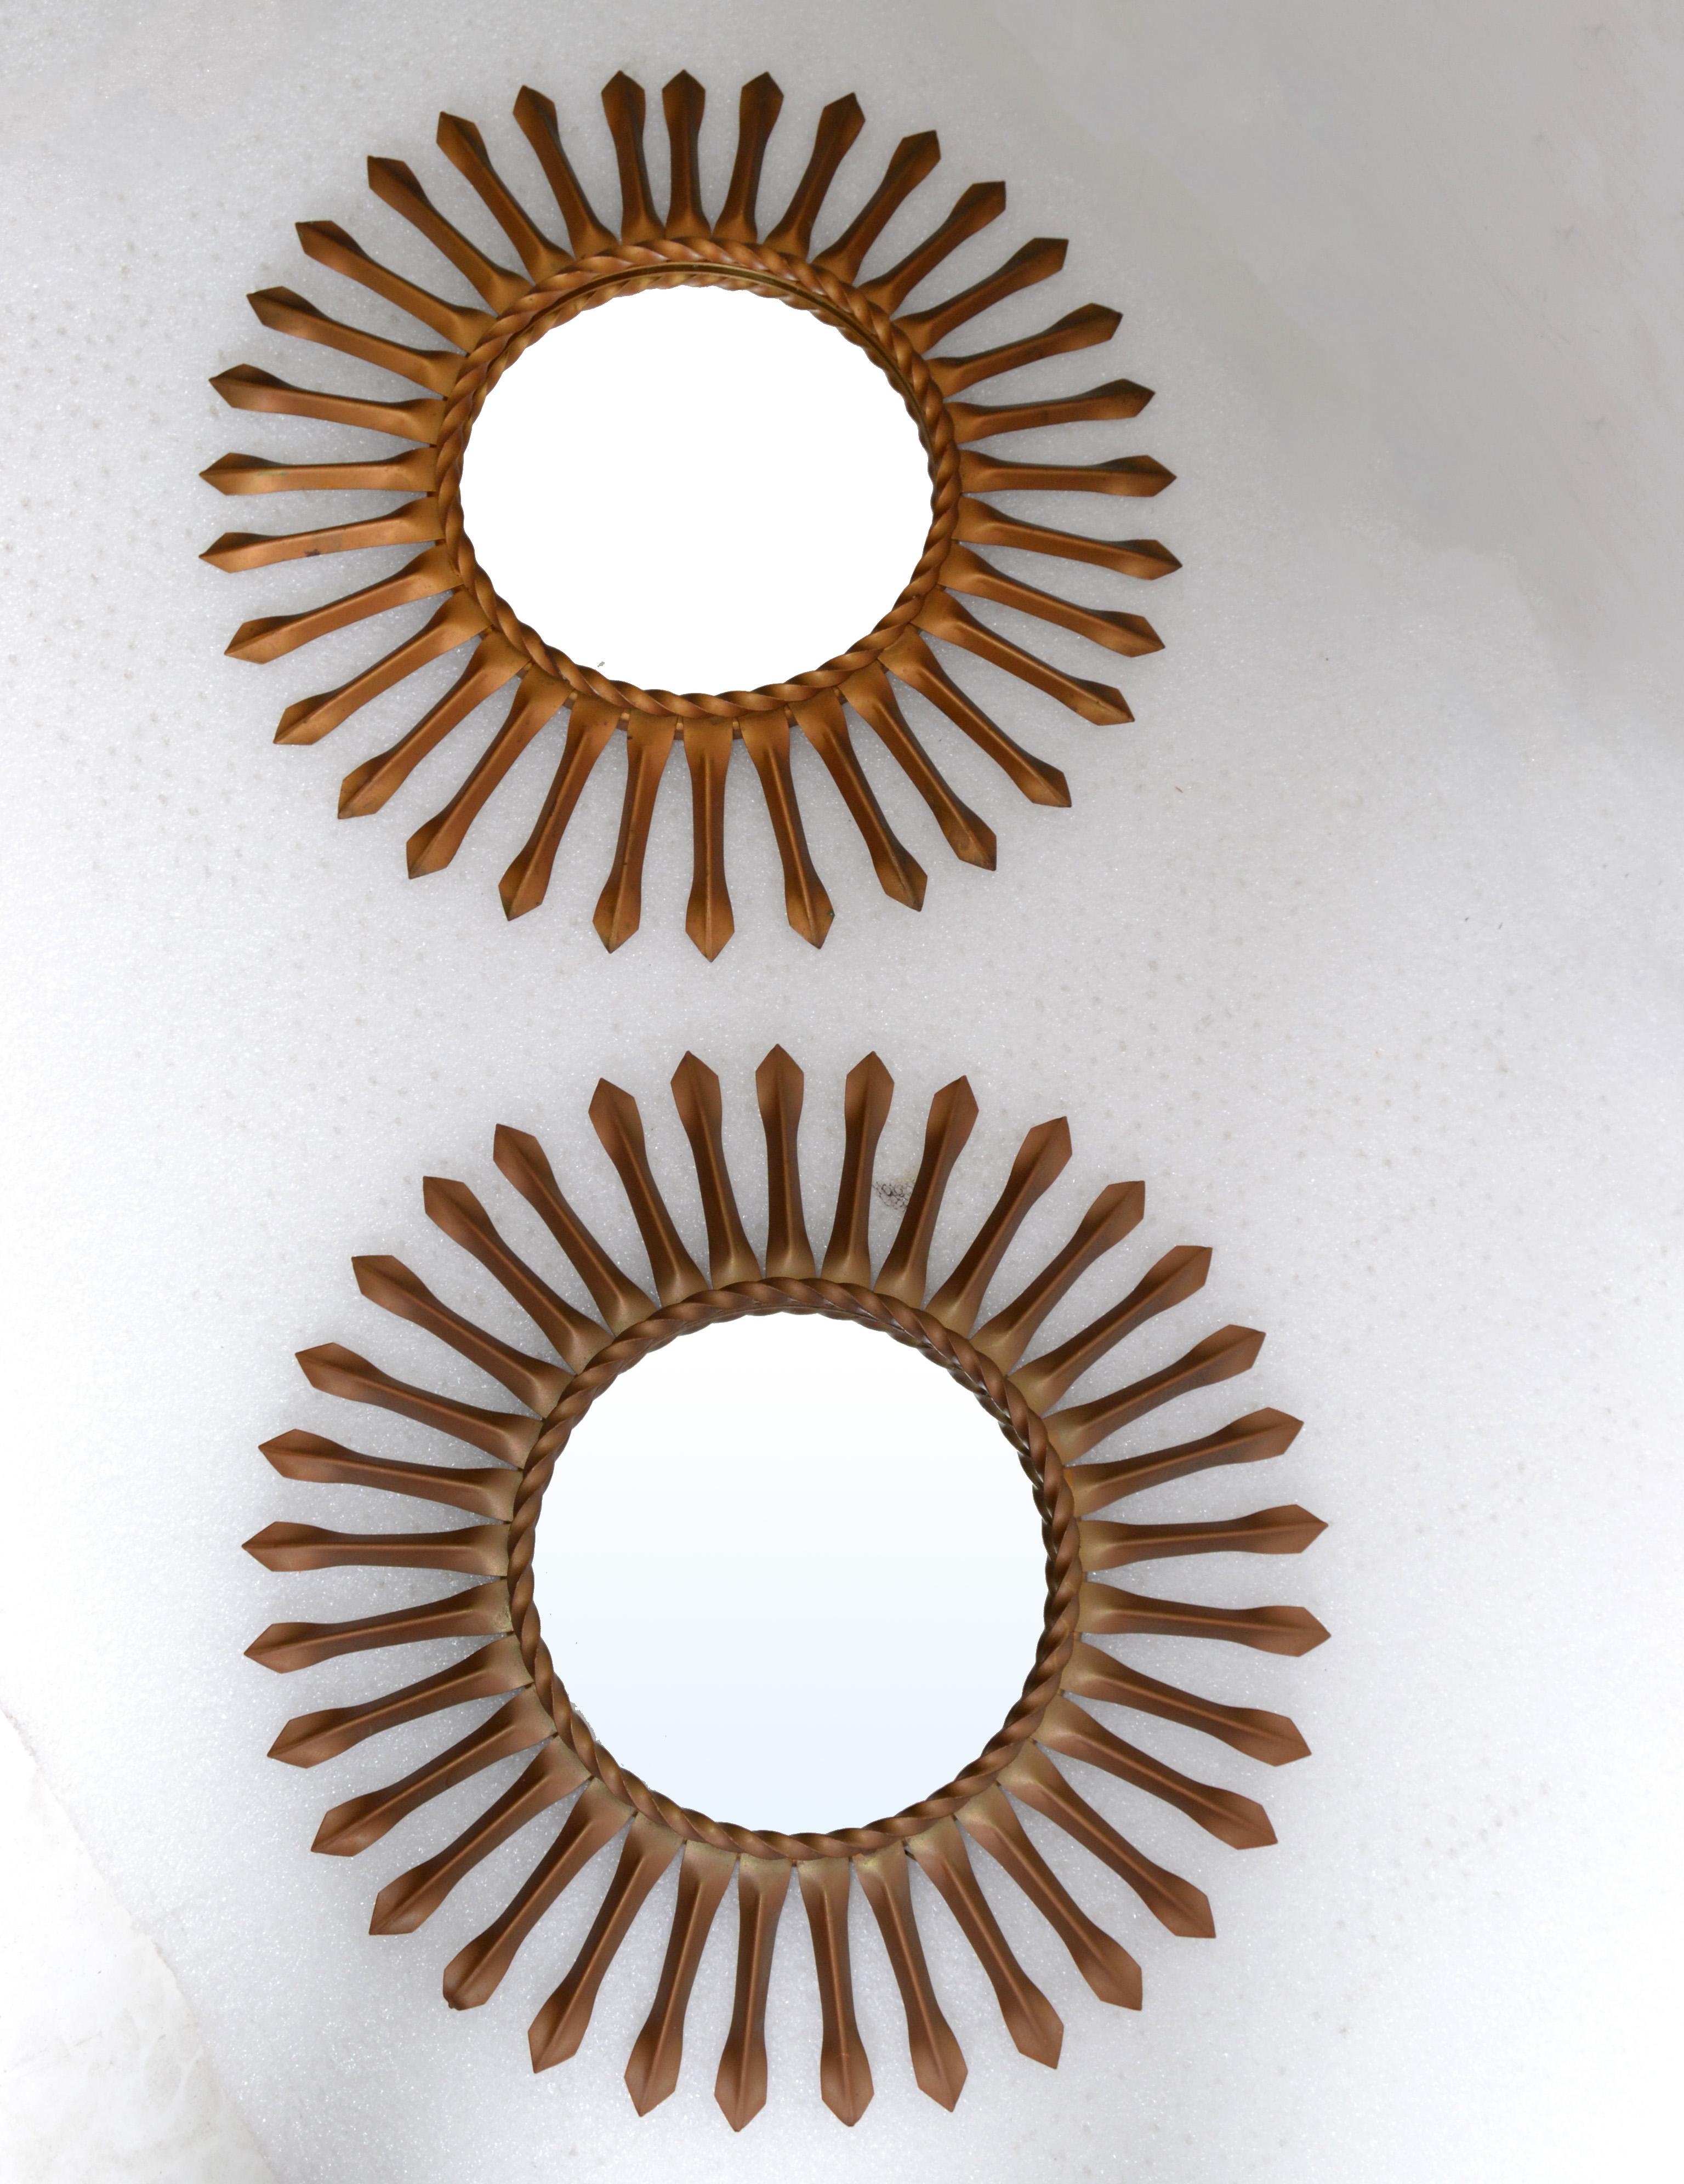 Set, Two Sunburst Wall Mirror in Gold Brass Finish Signed Chaty Vallauris, 1960 For Sale 2